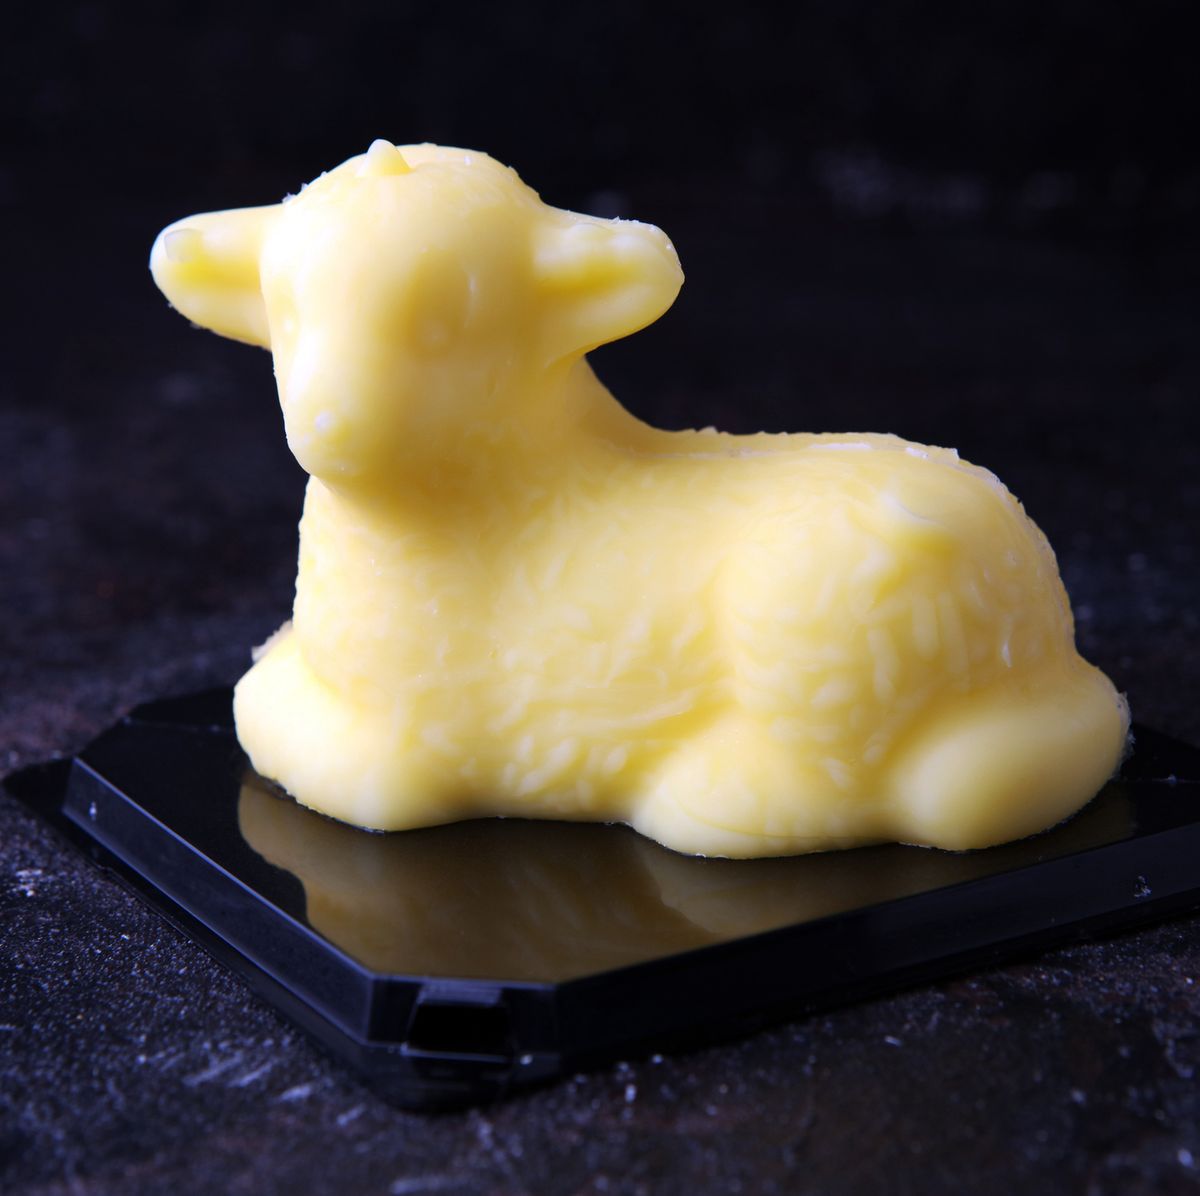 What Is a Butter Lamb? - Butter Lamb Easter Tradition, Explained